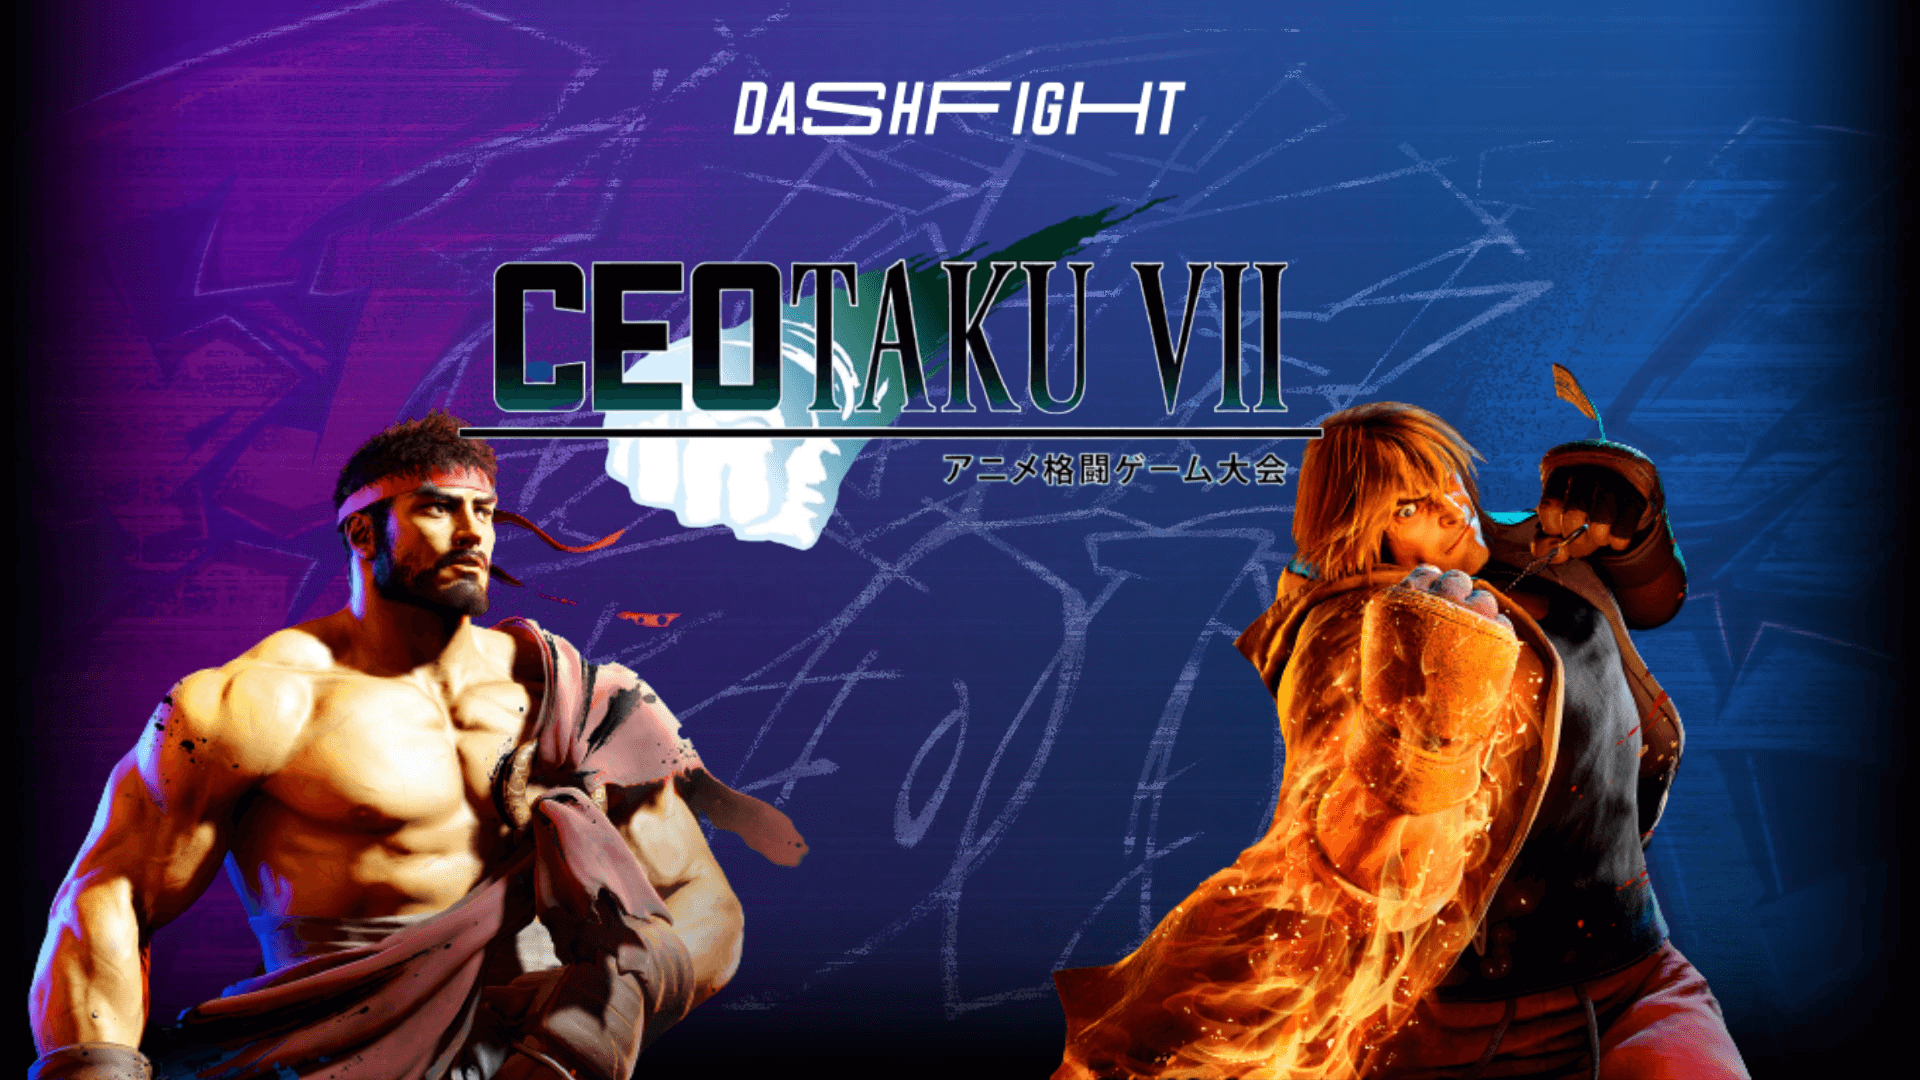 Street Fighter 6 at CEOtaku VII: The Family Man Wins!